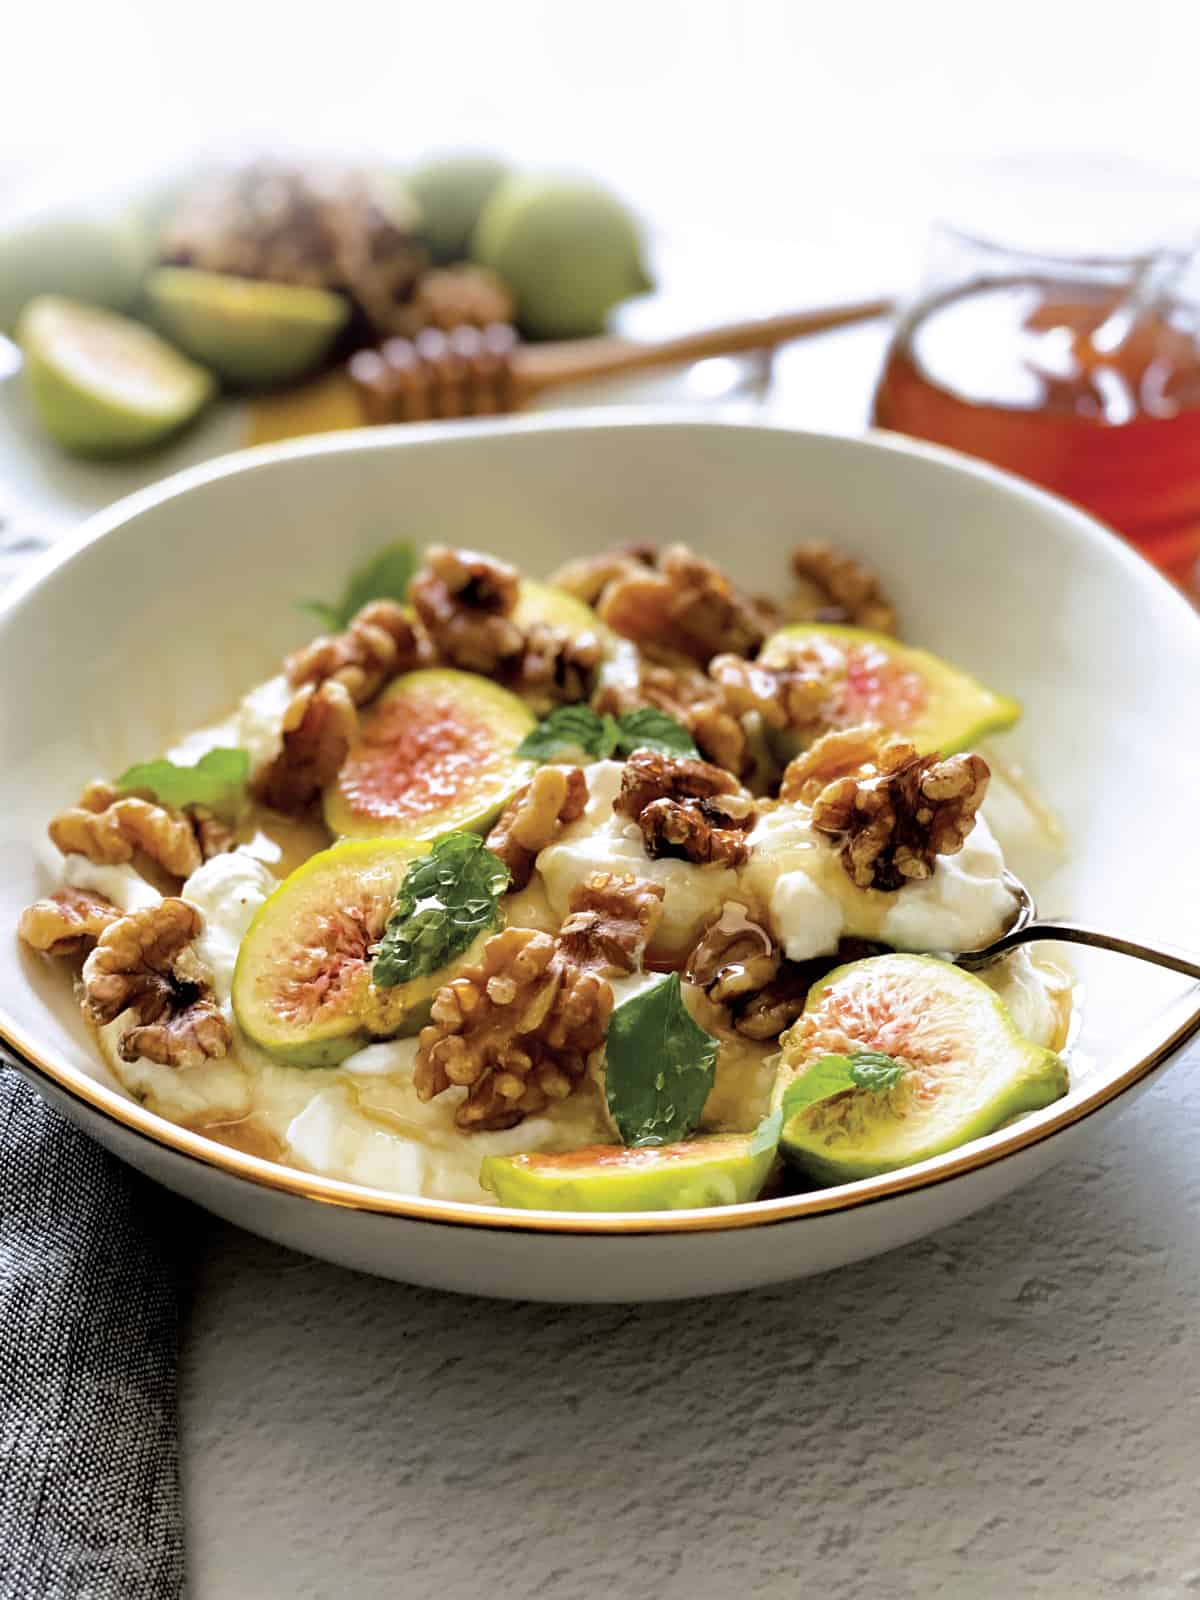 A plate with yogurt, sliced figs, walnuts and honey and a spoon. At the back a plate with figs and nuts, a honey dripper and a pot of honey.